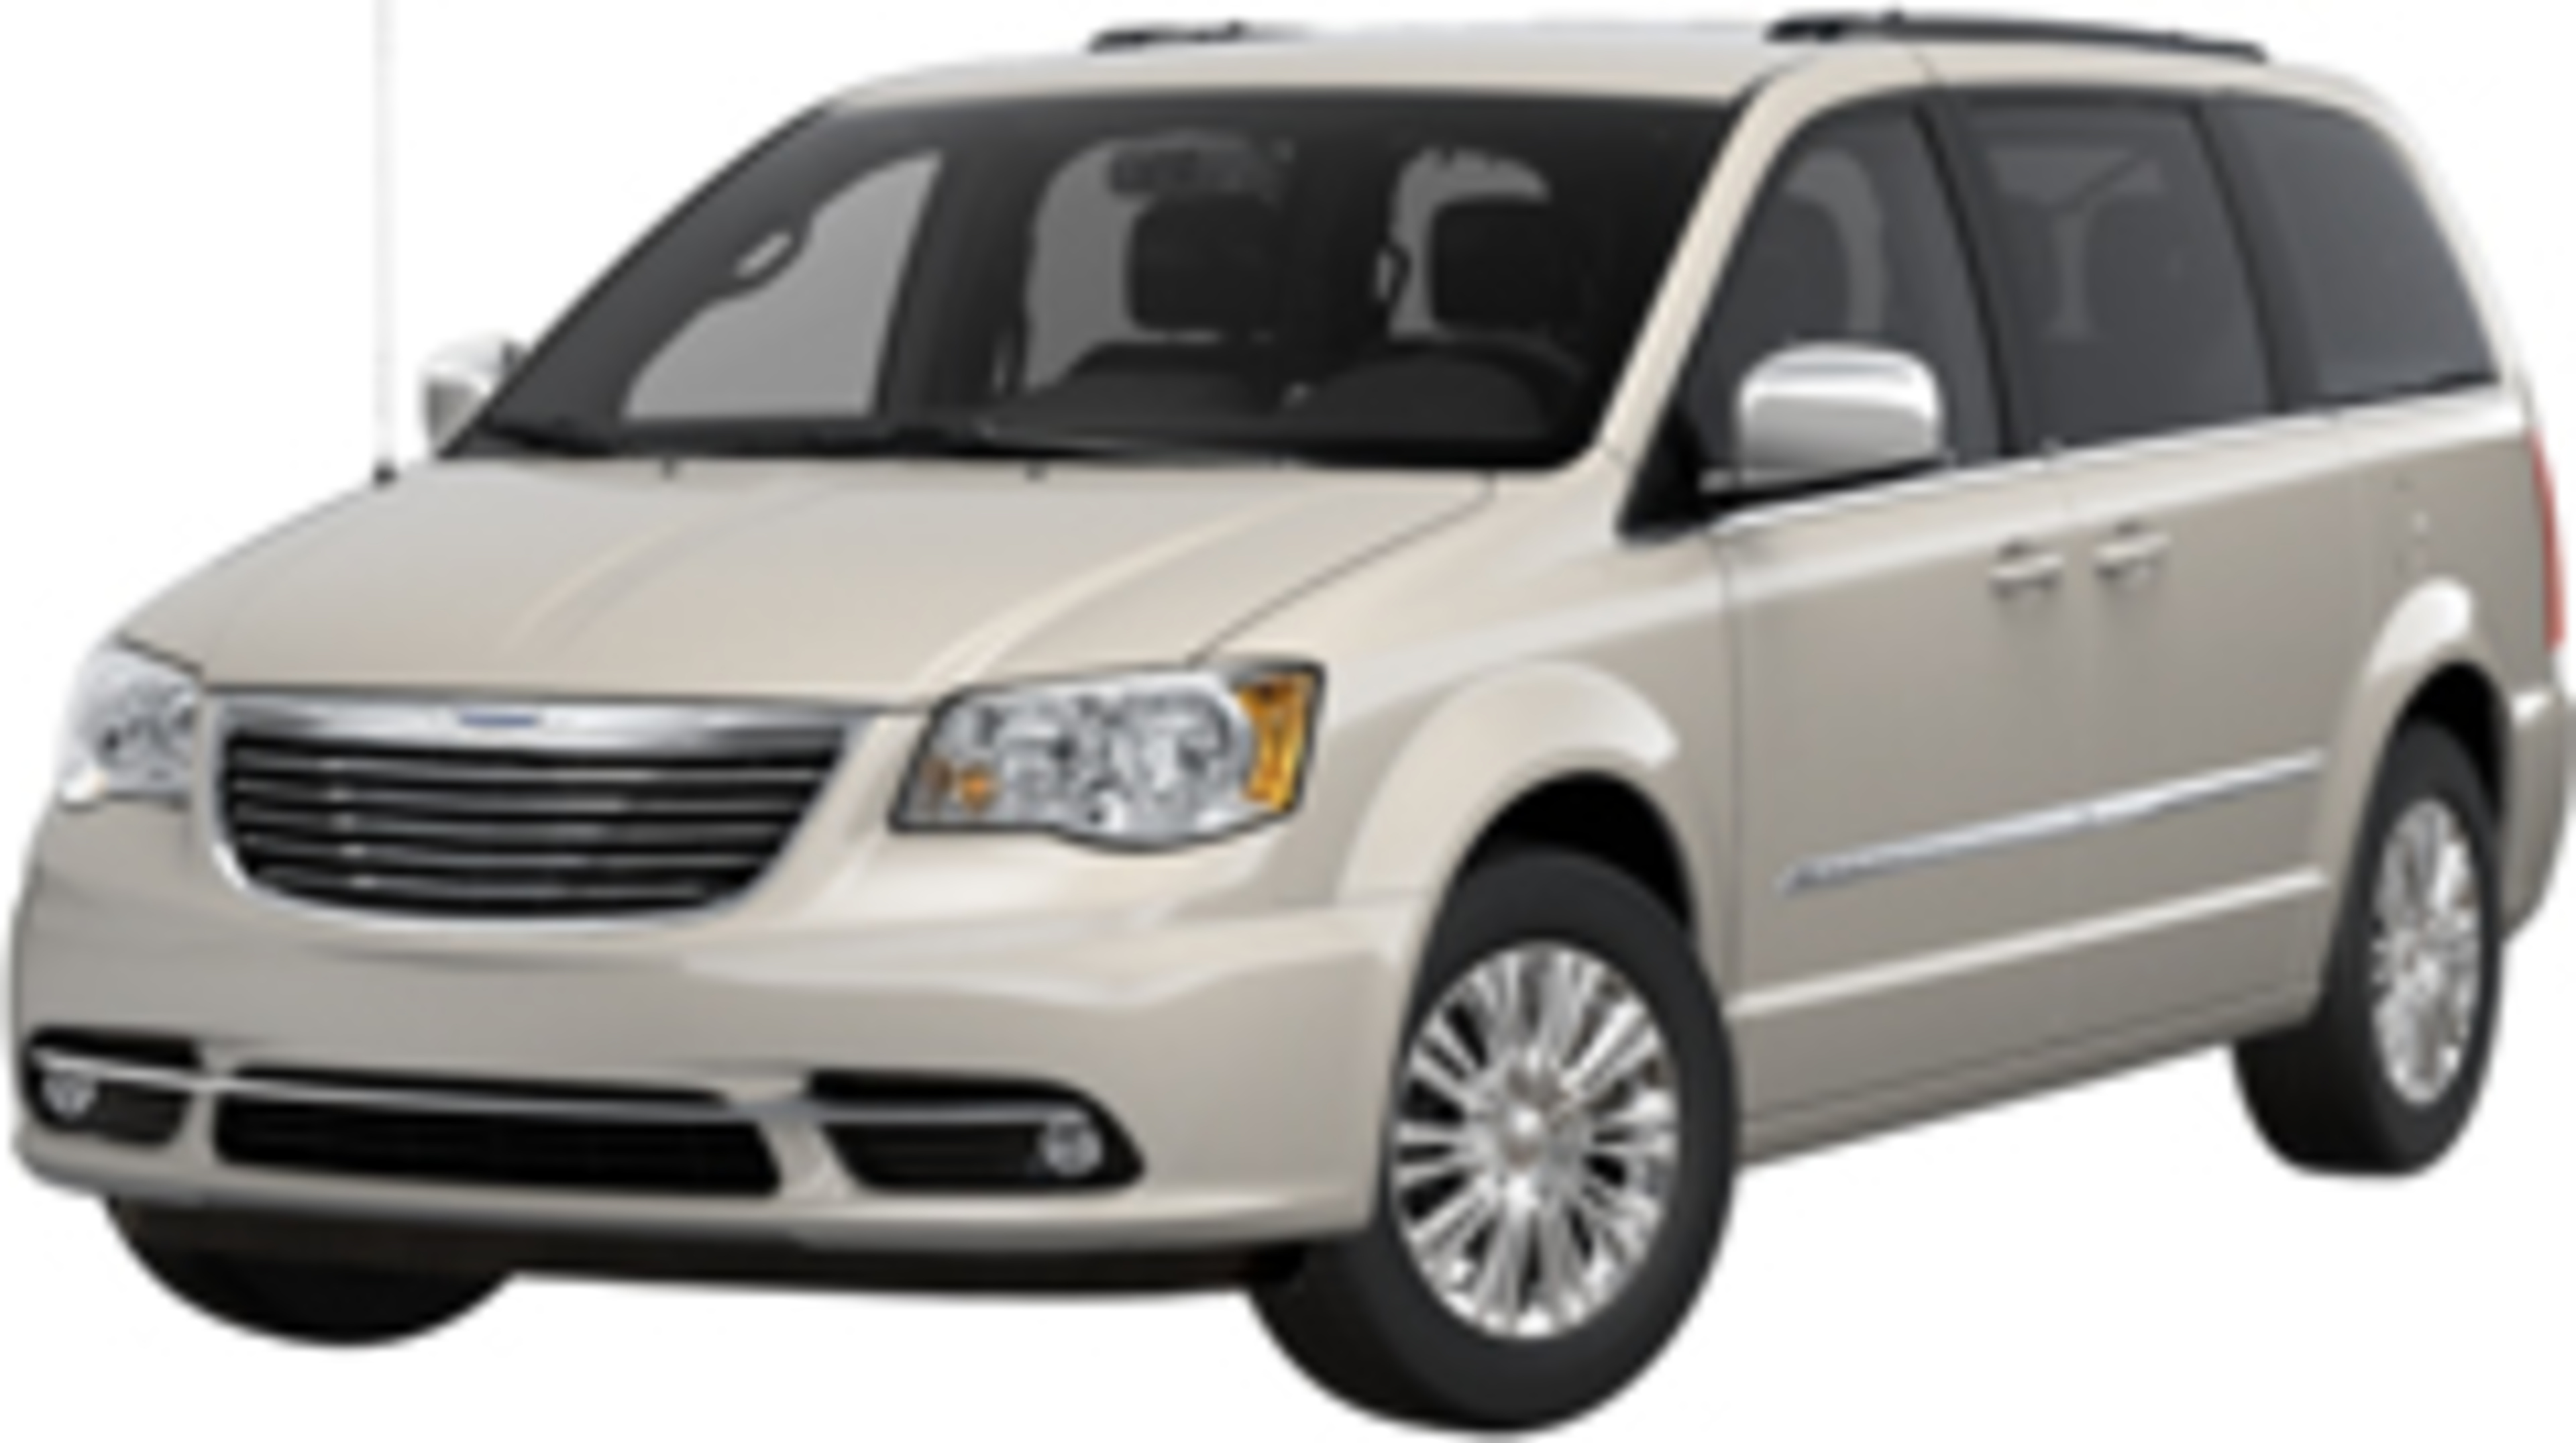 2014 Chrysler Town & Country Service and Repair Manual